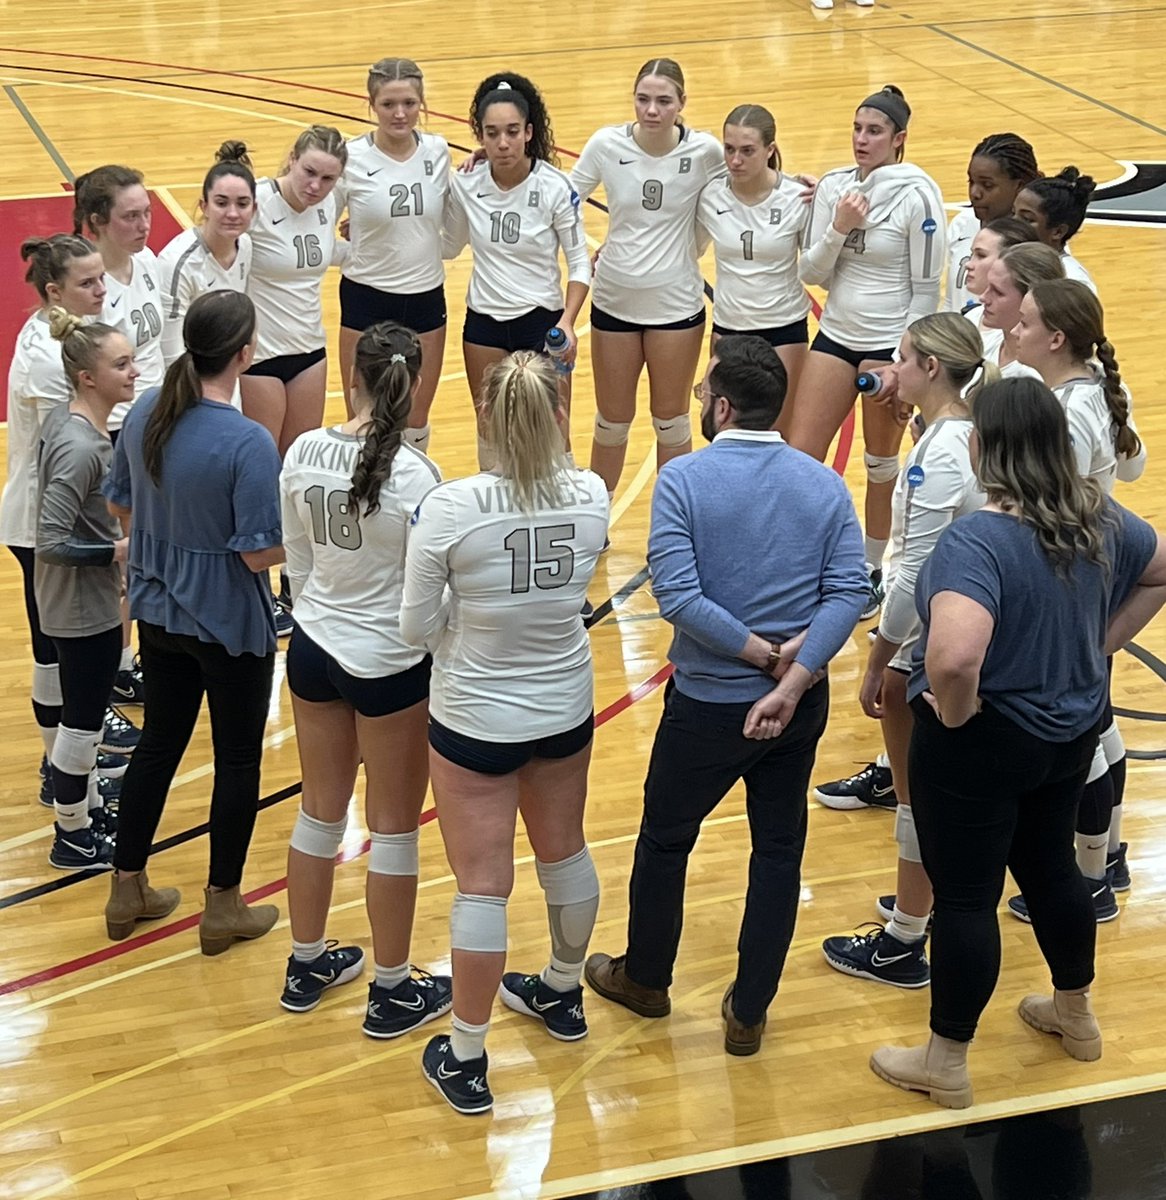 So proud of these Vikings… played their hearts out and left it all out there. We are with you…. #BattleBerry #ProudAD @BerryVolleyball @BerryVikings